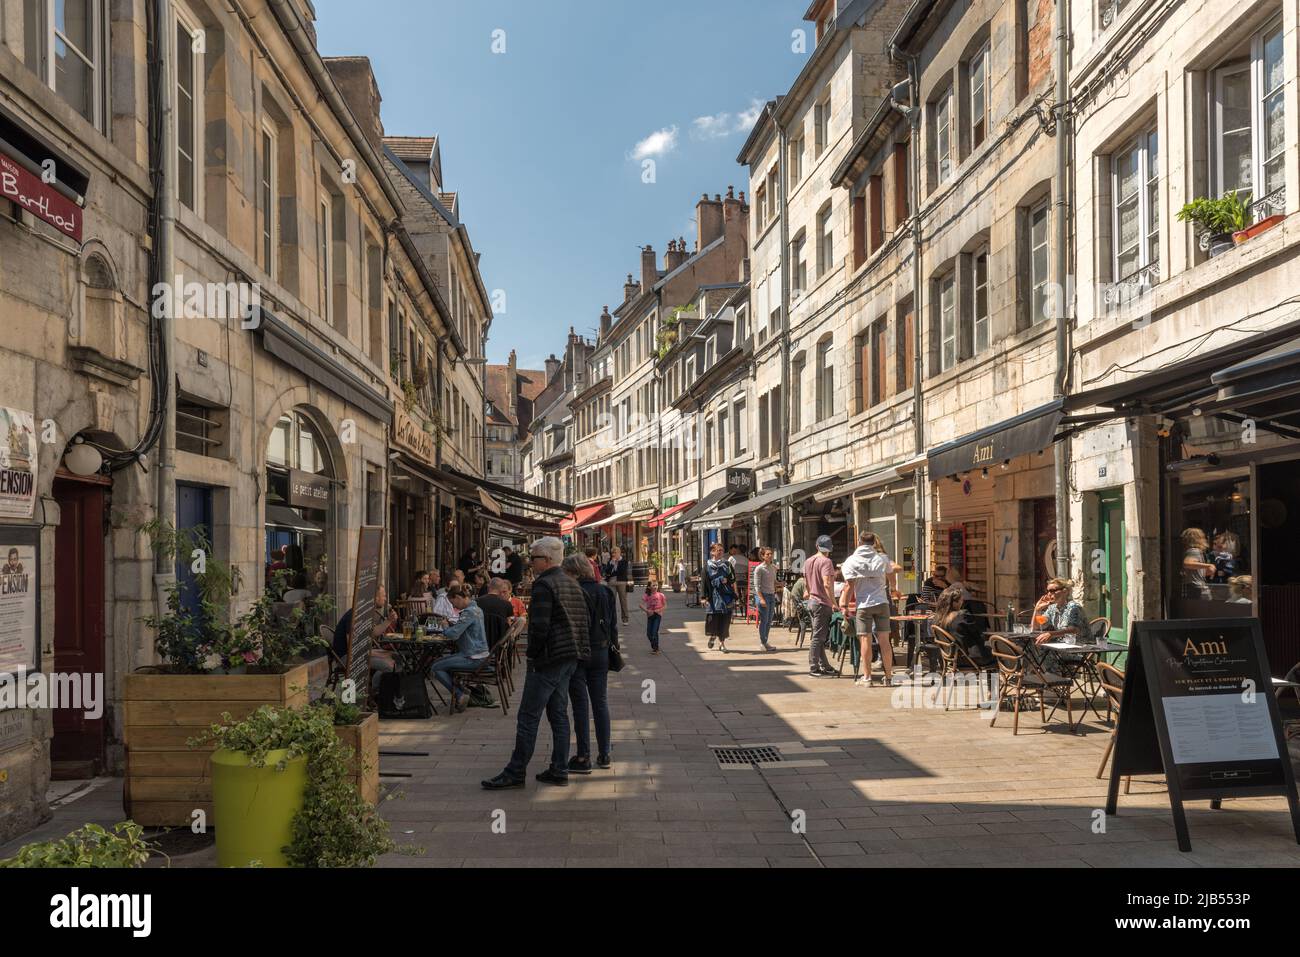 unknown people in historic old town of Besancon, Franche-Comte, France Stock Photo